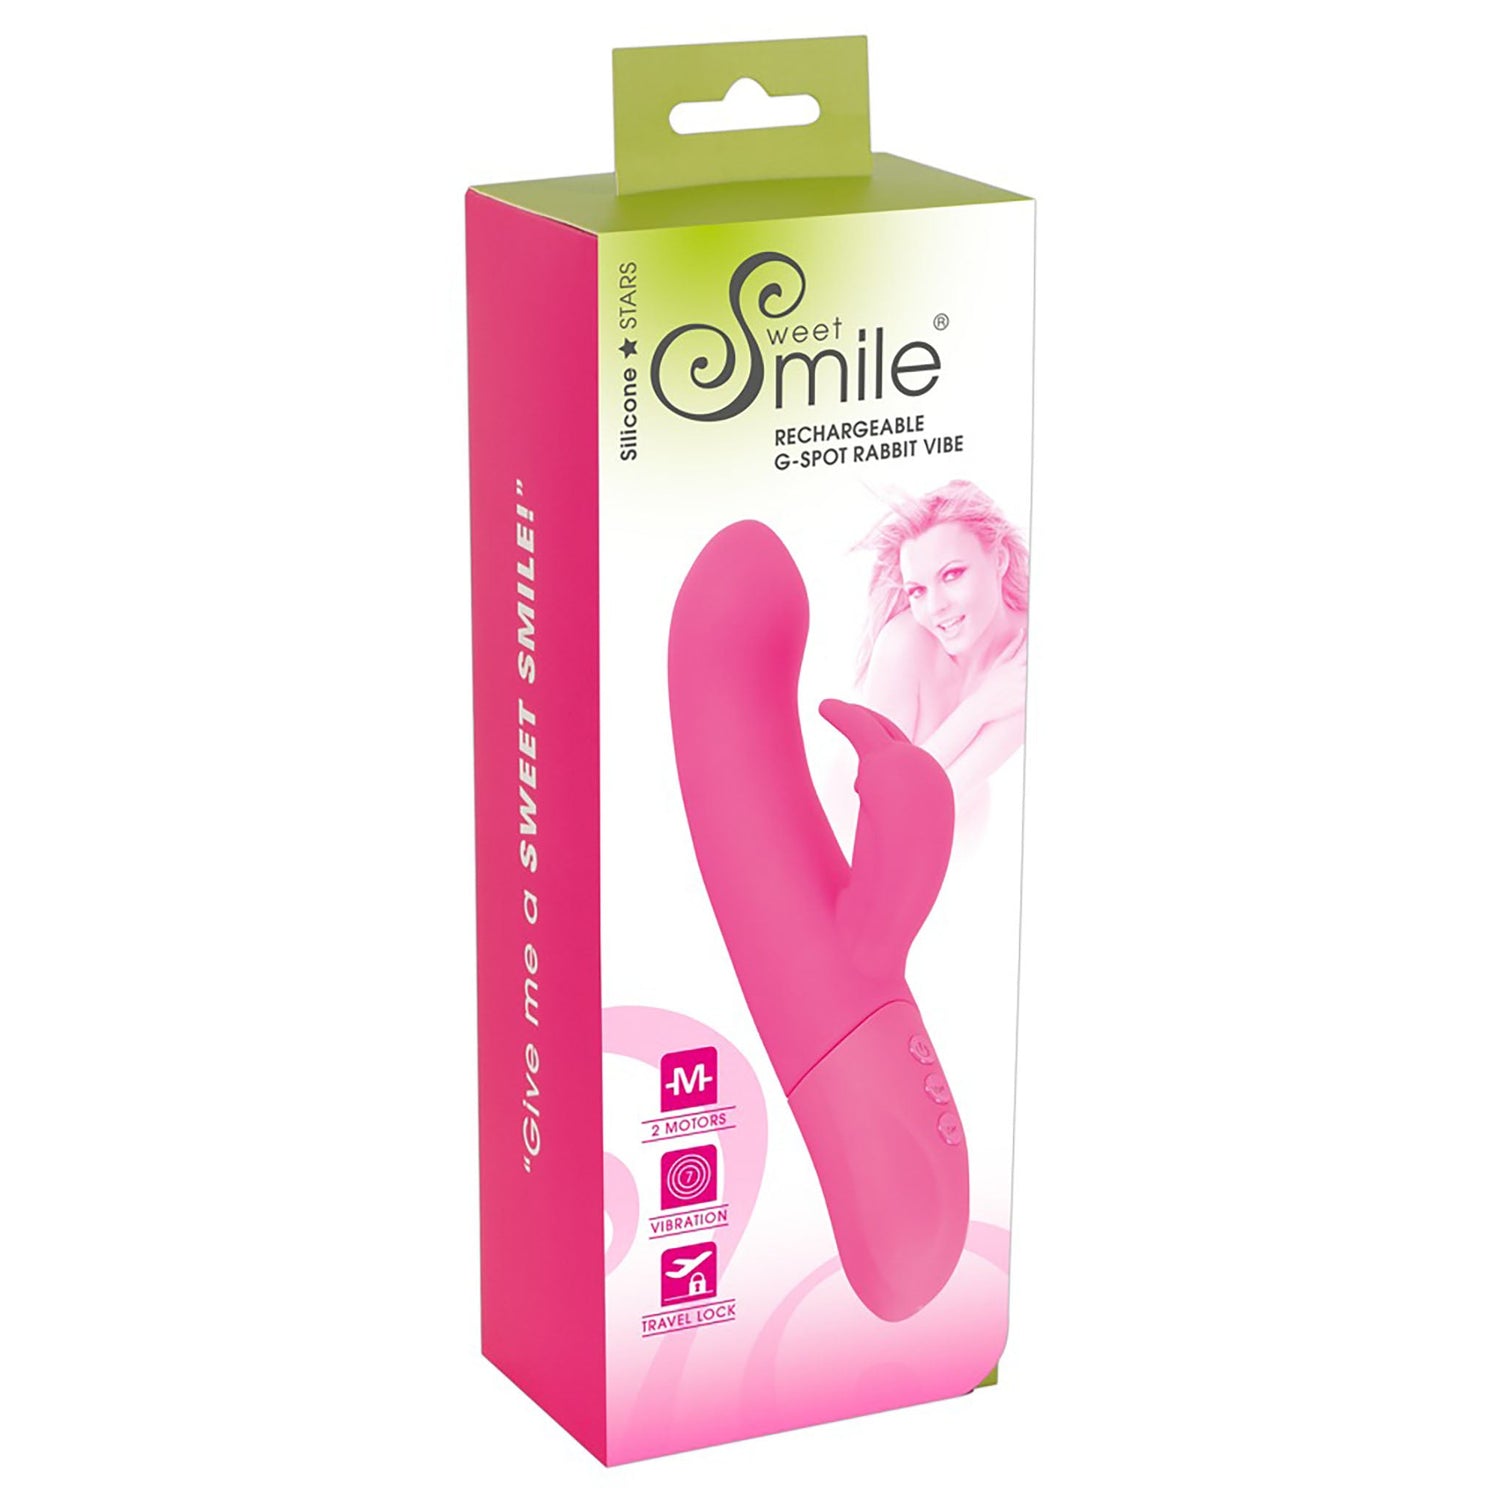 Rechargeable G-Sport Rabbitvibrator in rosa von Sweet Smile in Verpackung